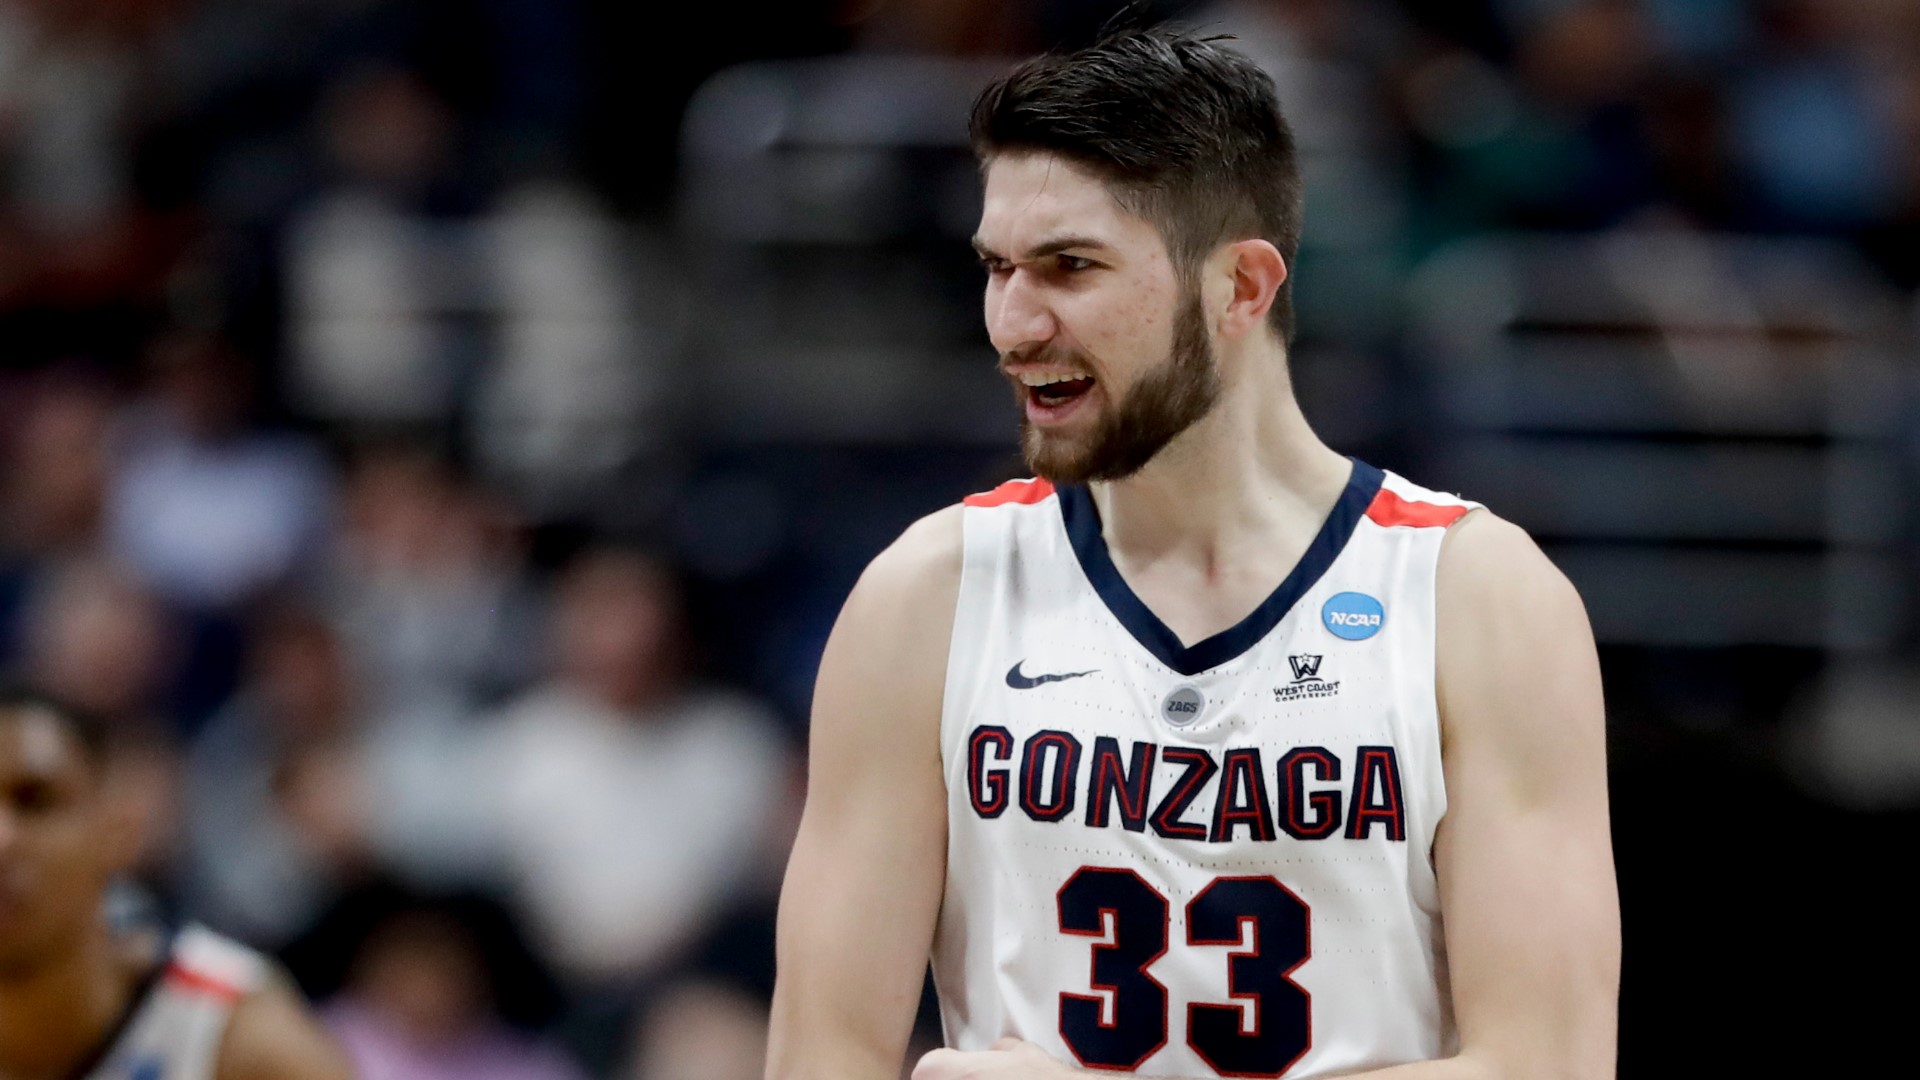 We look back at the sights and sounds of Killian Tillie's career in a Gonzaga uniform.